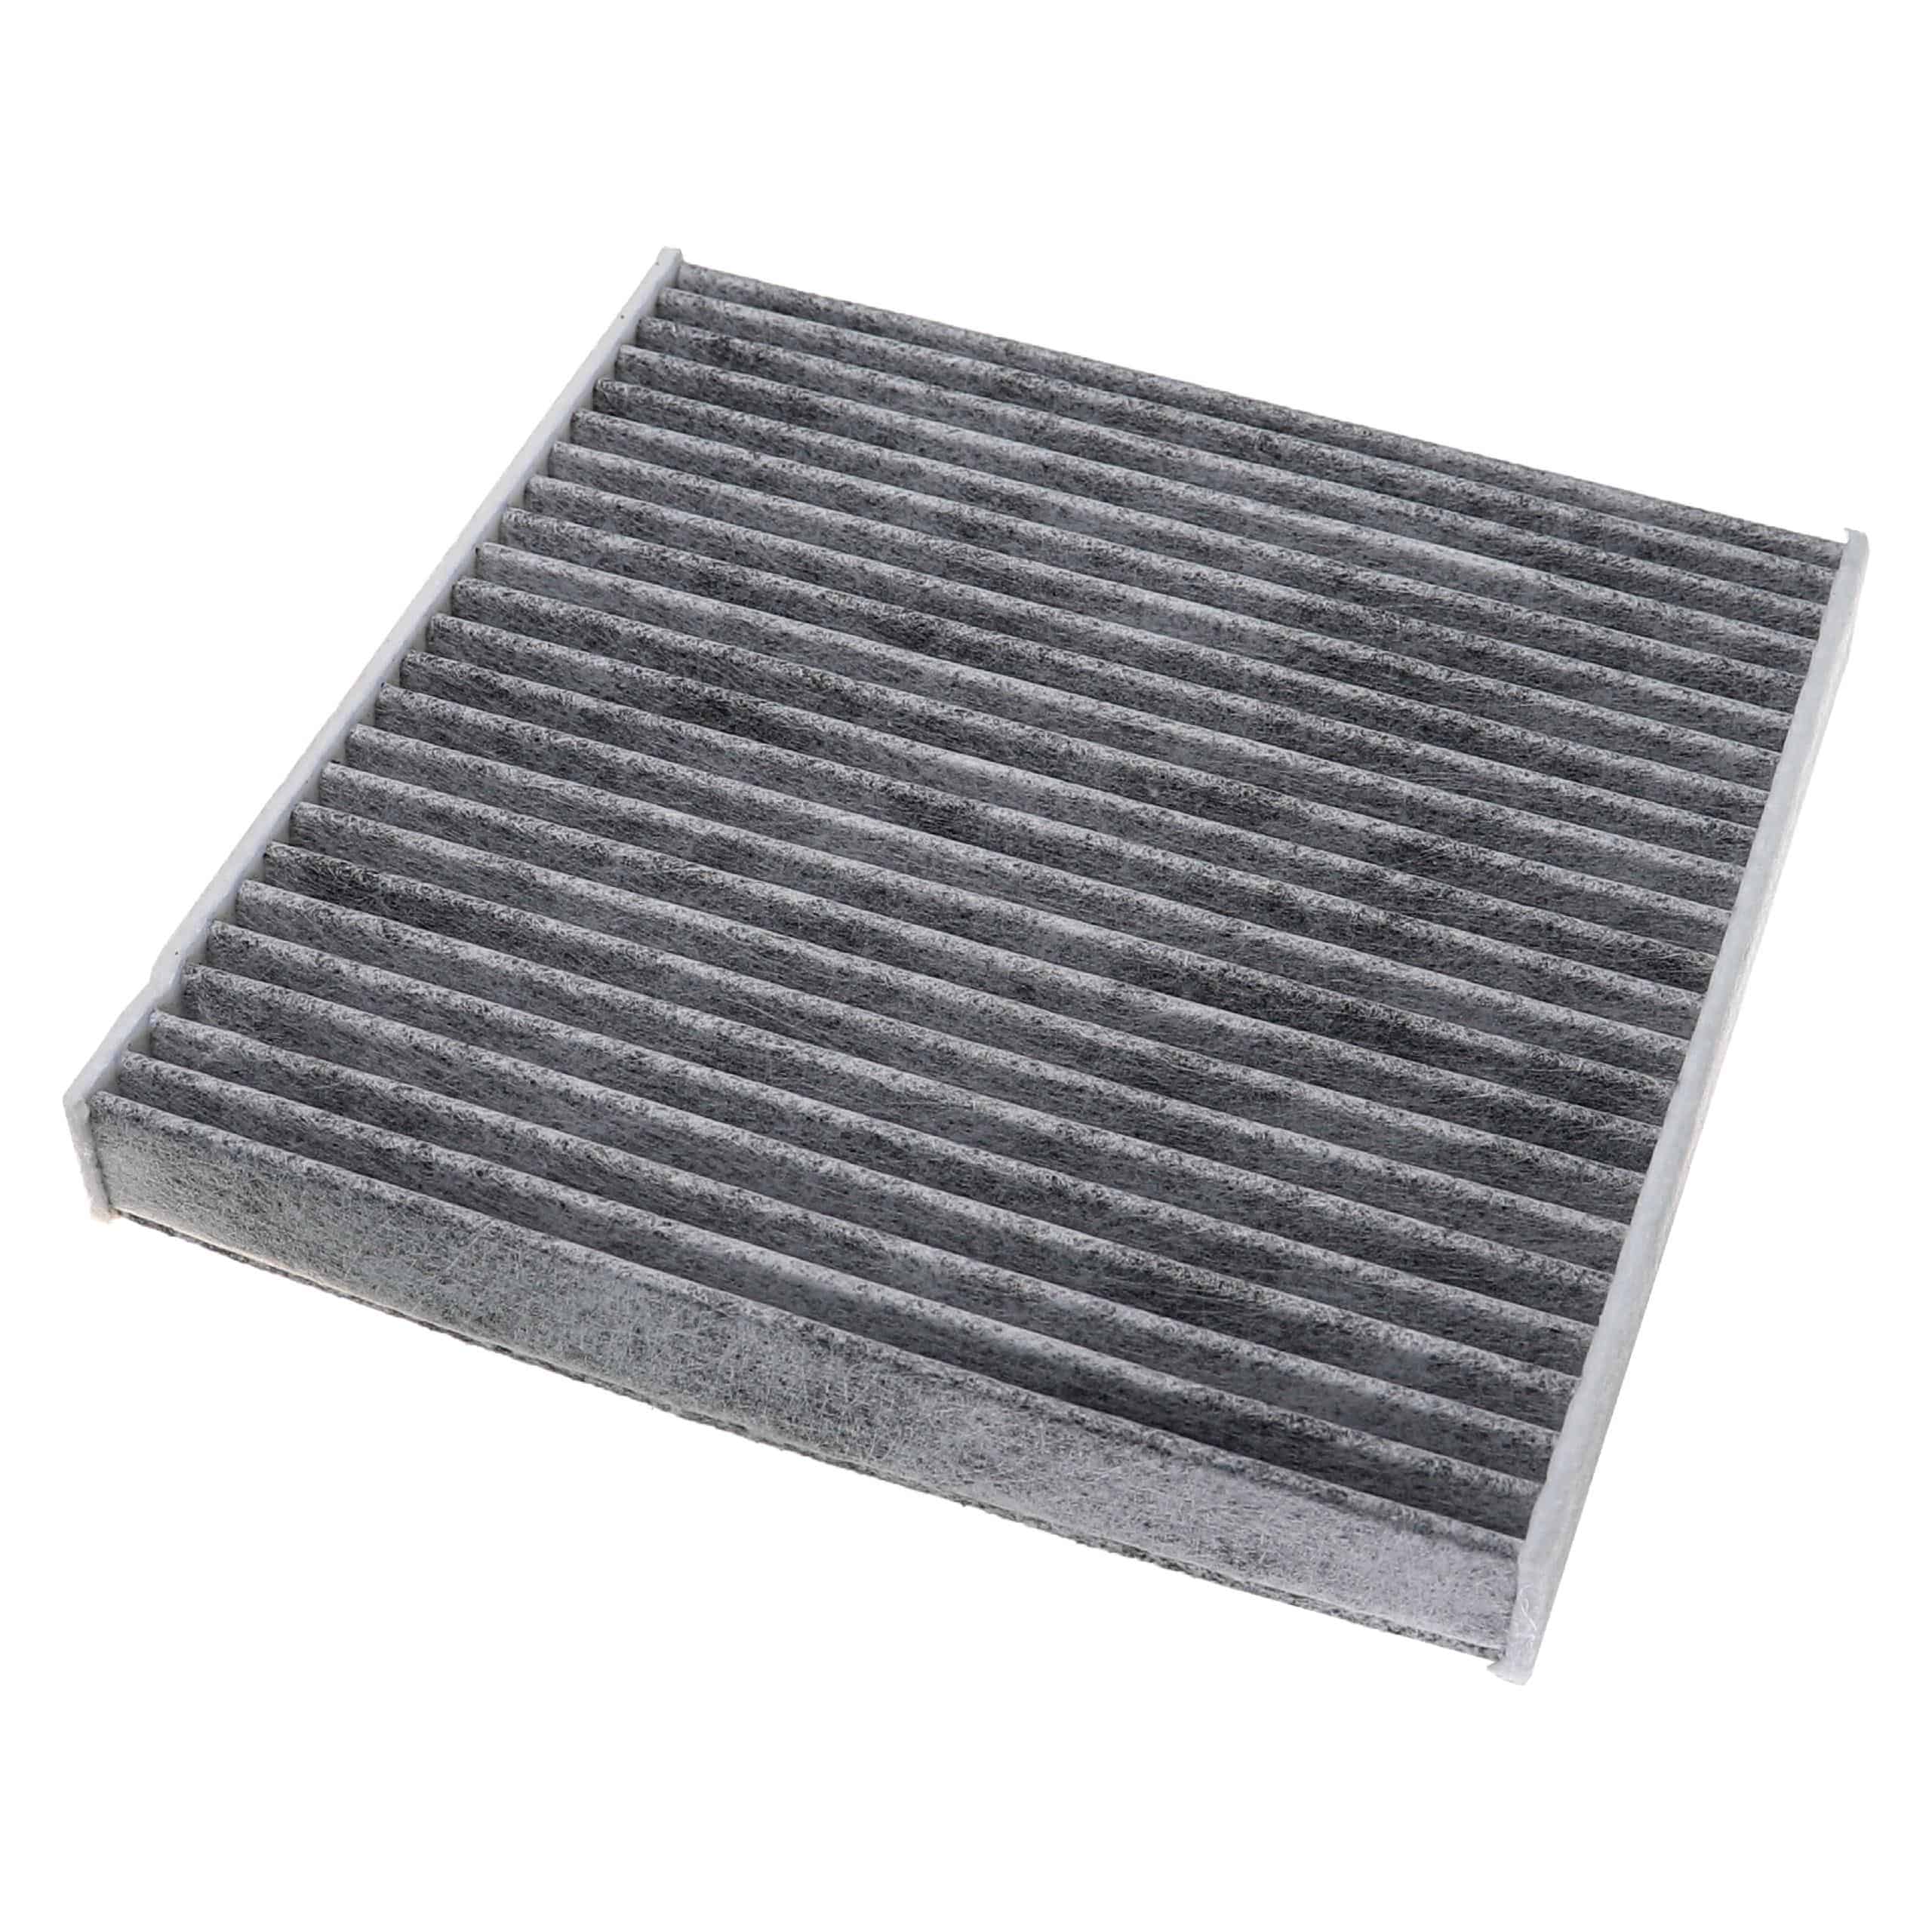 Cabin Air Filter replaces 3F Quality 1675 etc.